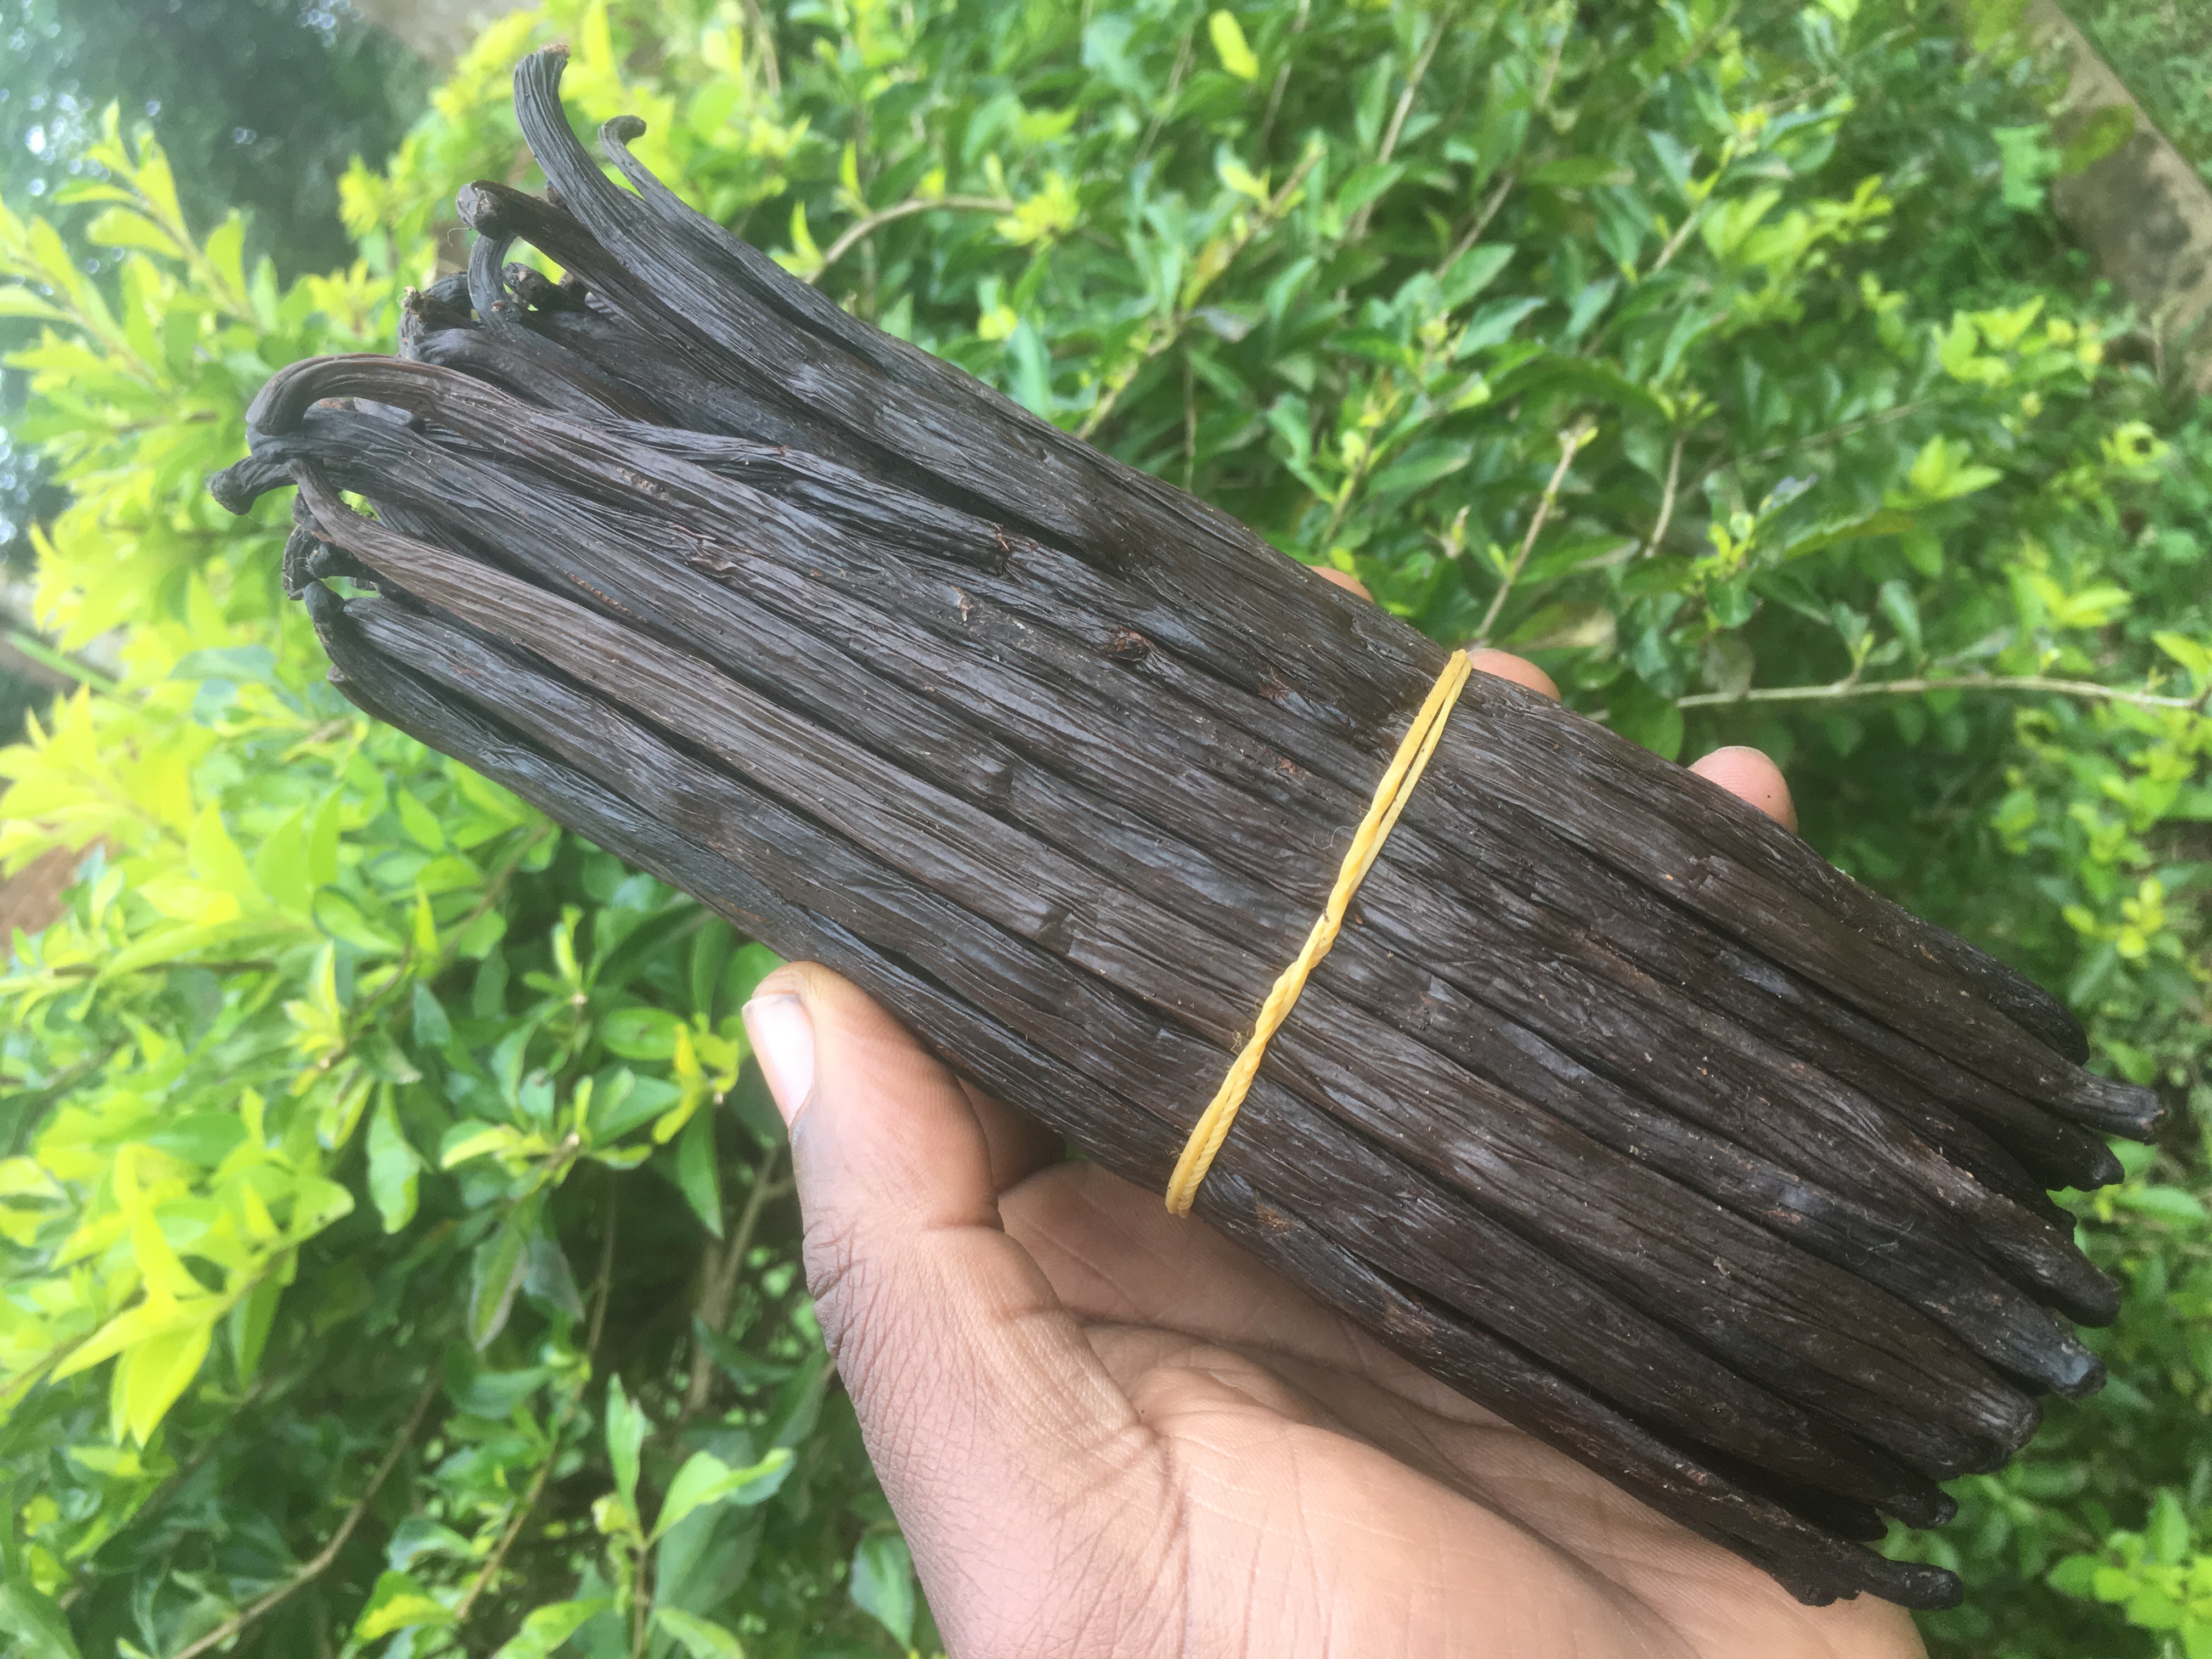 How to use Vanilla effectively; Buy the best Vanilla Beans, Make your own Vanilla Extracts, Find Vanilla Recipes and Create your own Vanilla products